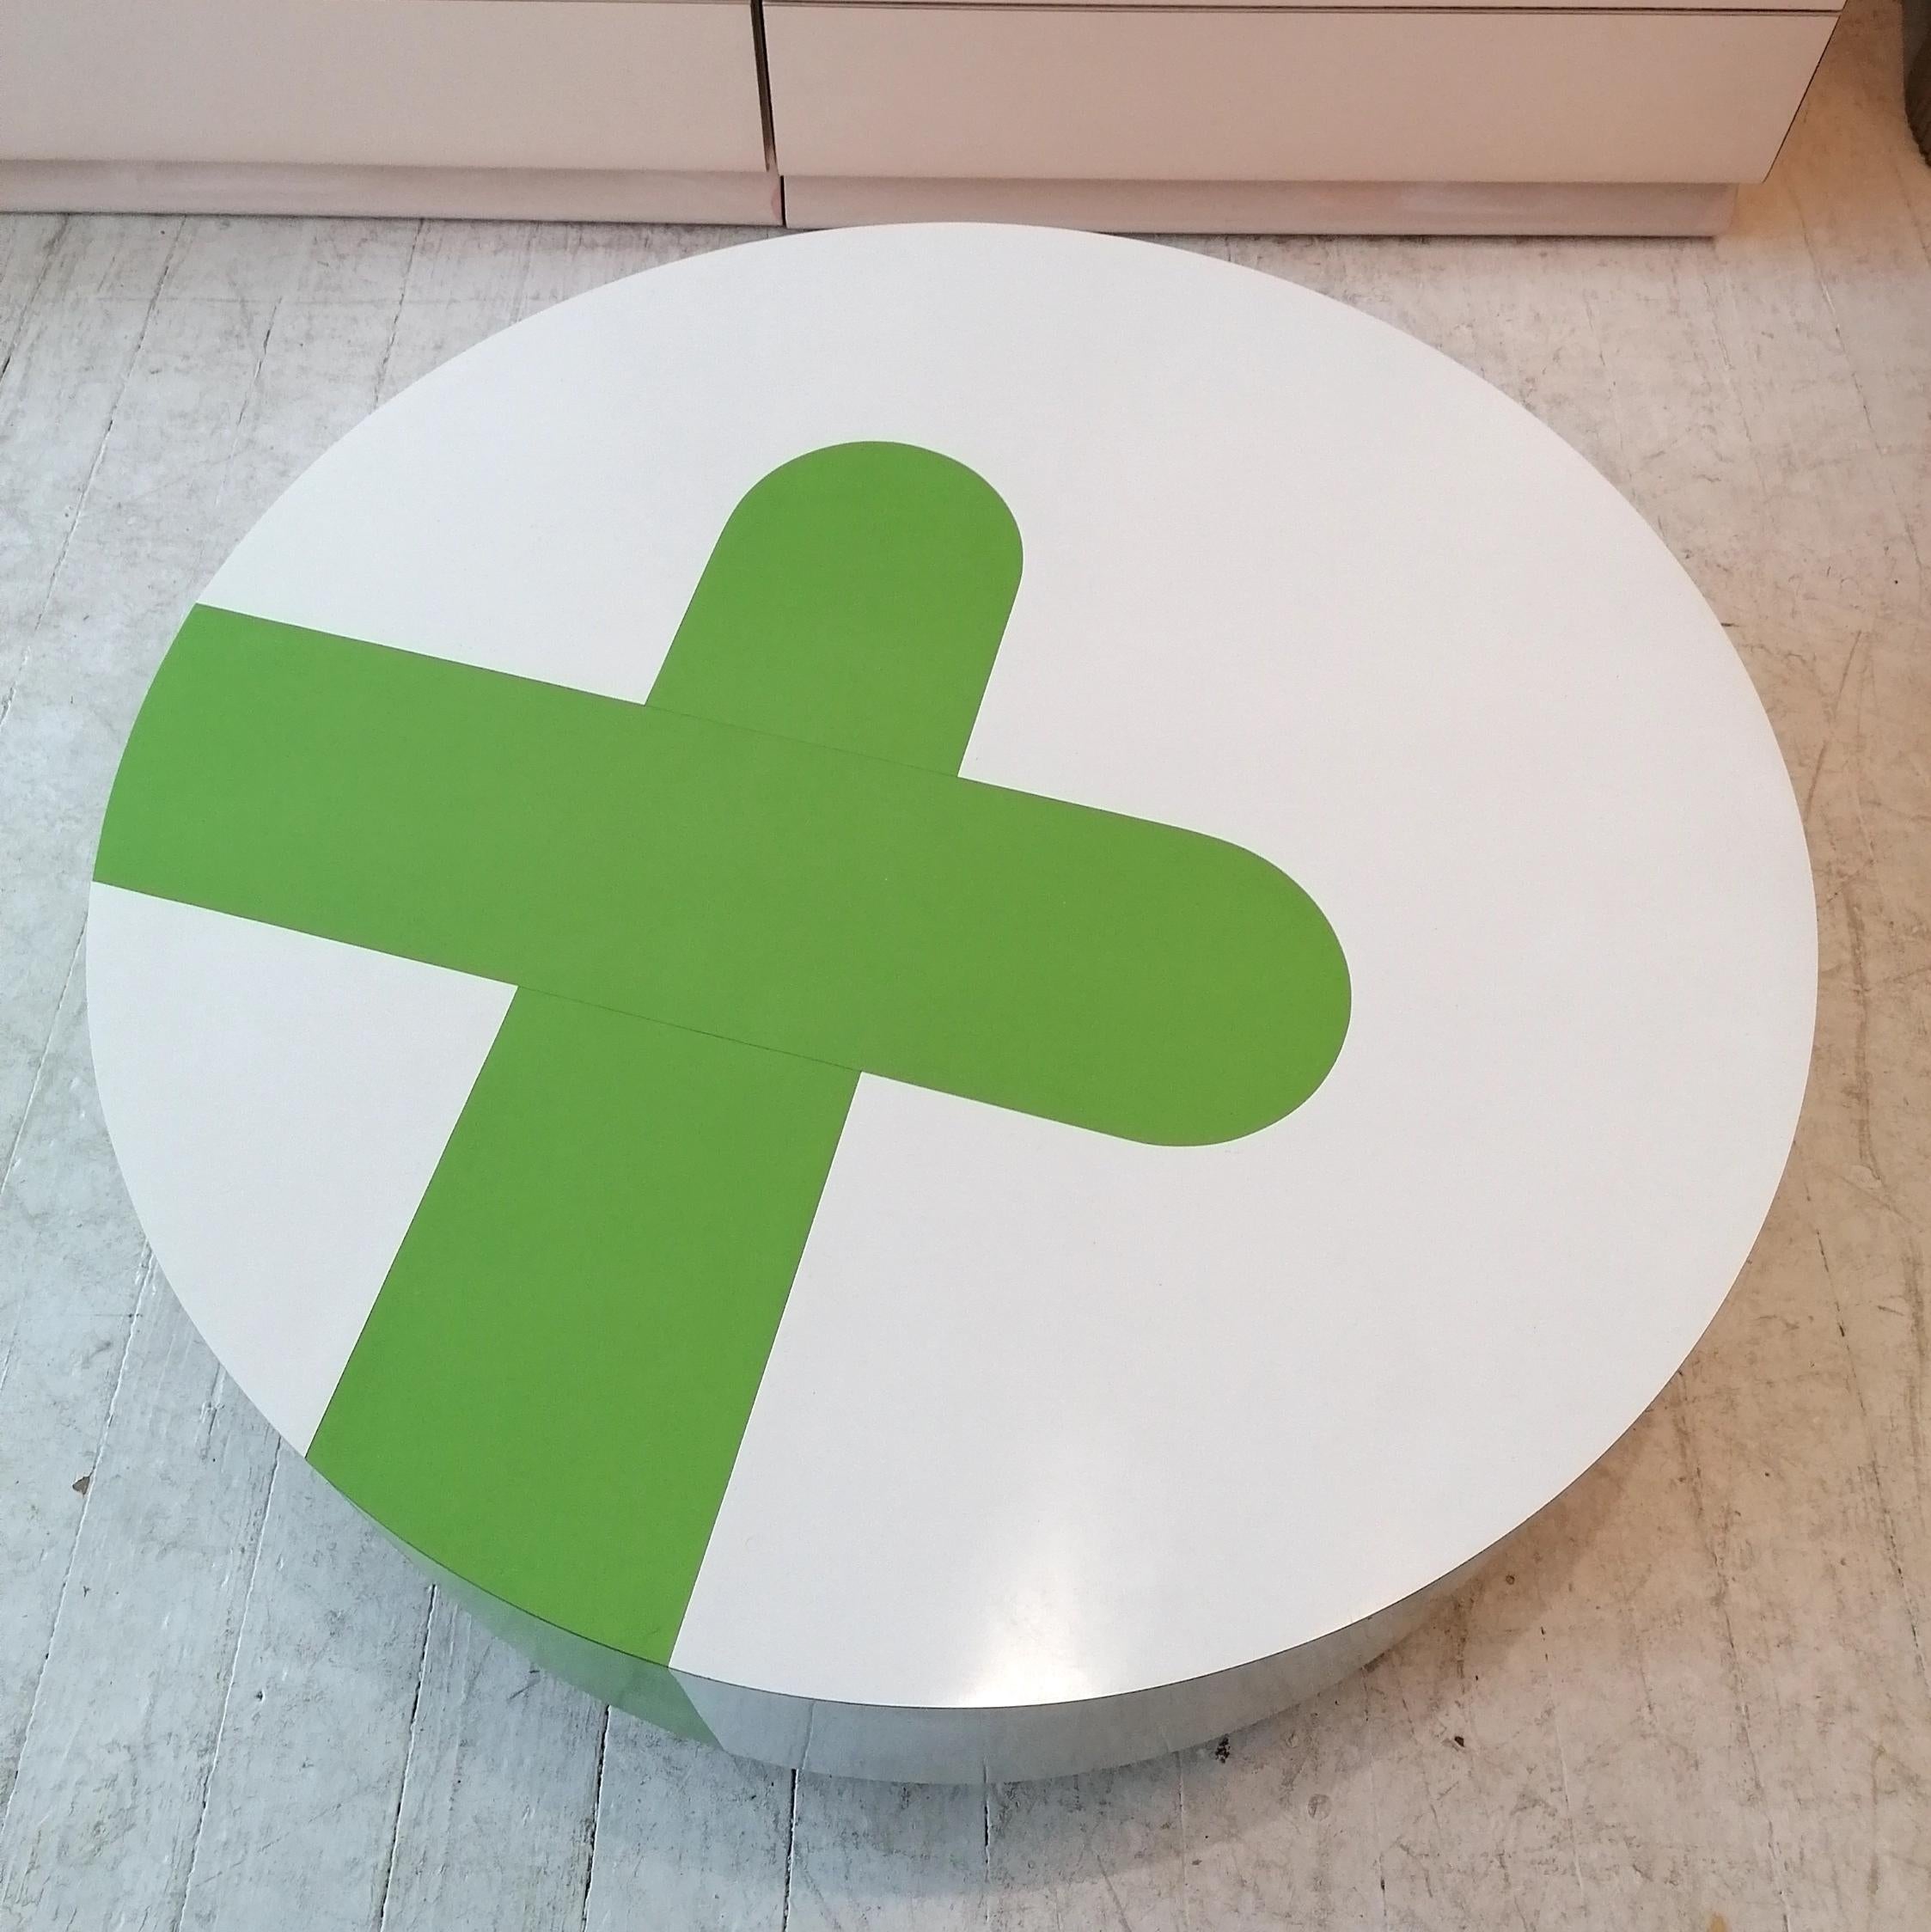 Large Postmodern White & Green Laminate Coffee Table on Casters, USA 1980s 1990s For Sale 2